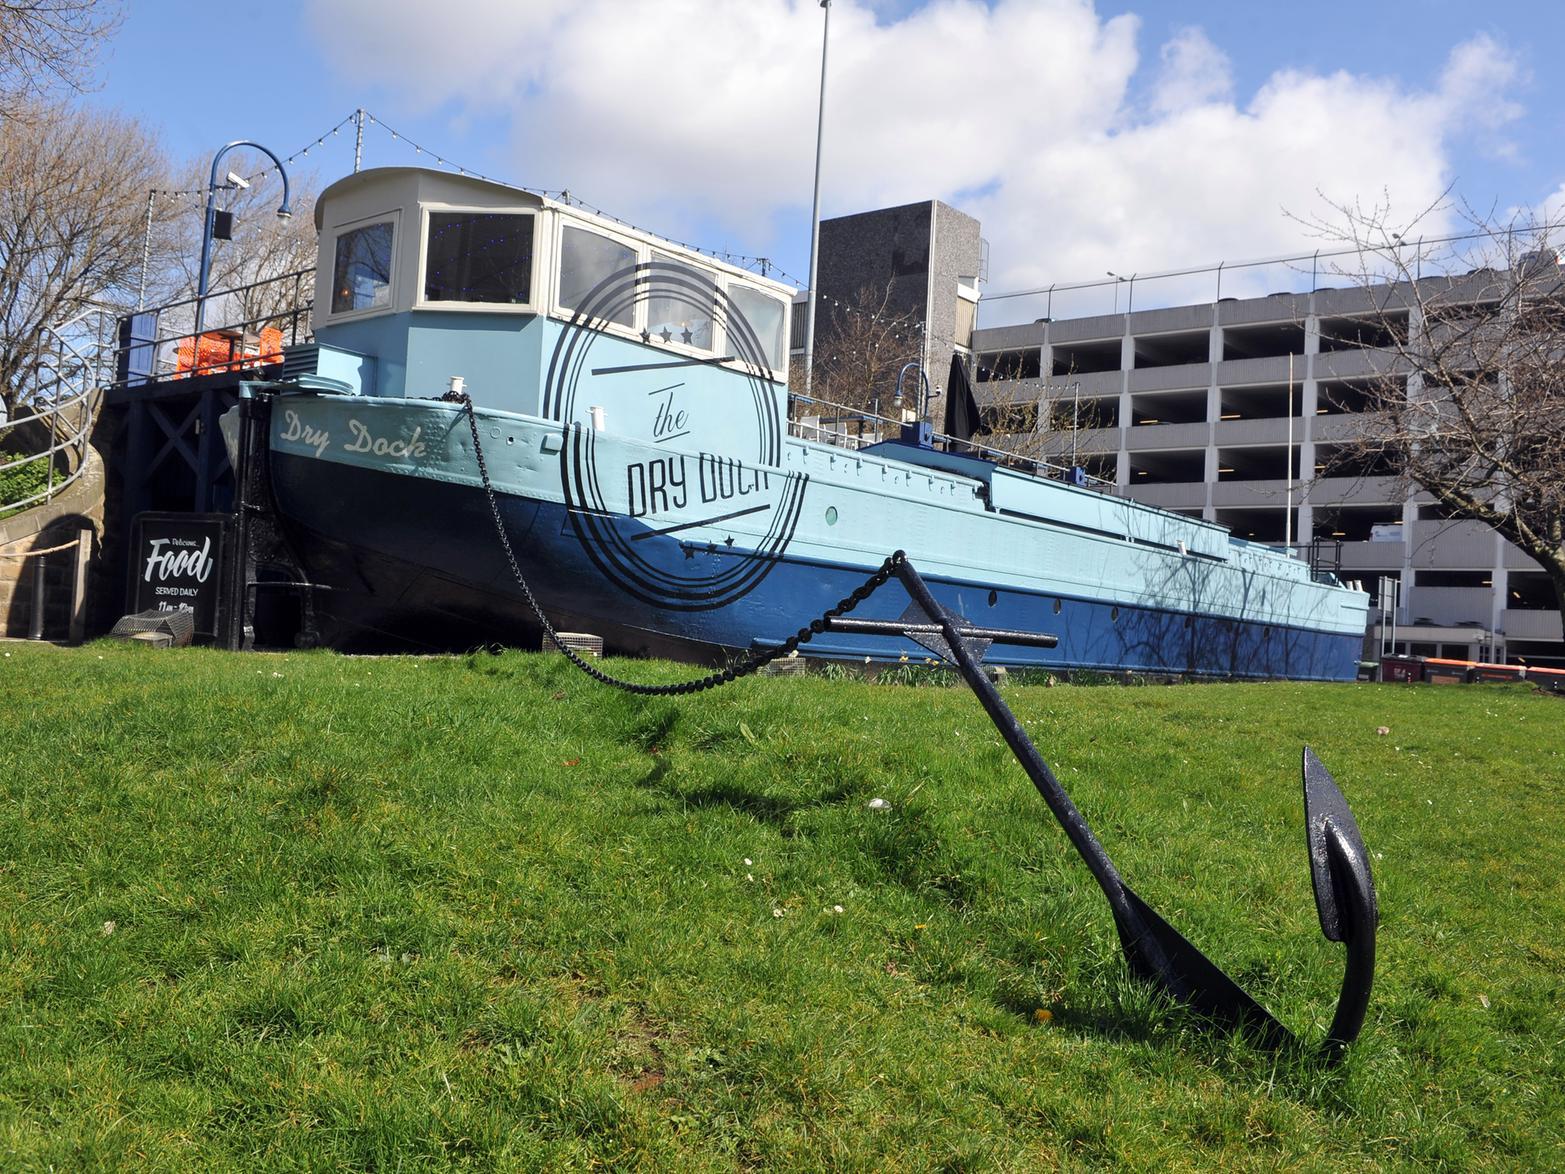 The sight of a boat moored on a grassy verge isnt an odd sight to stumble across to people in Leeds, with Dry Dock being a popular haunt for both its drinks, food, atmosphere and quirky charm.